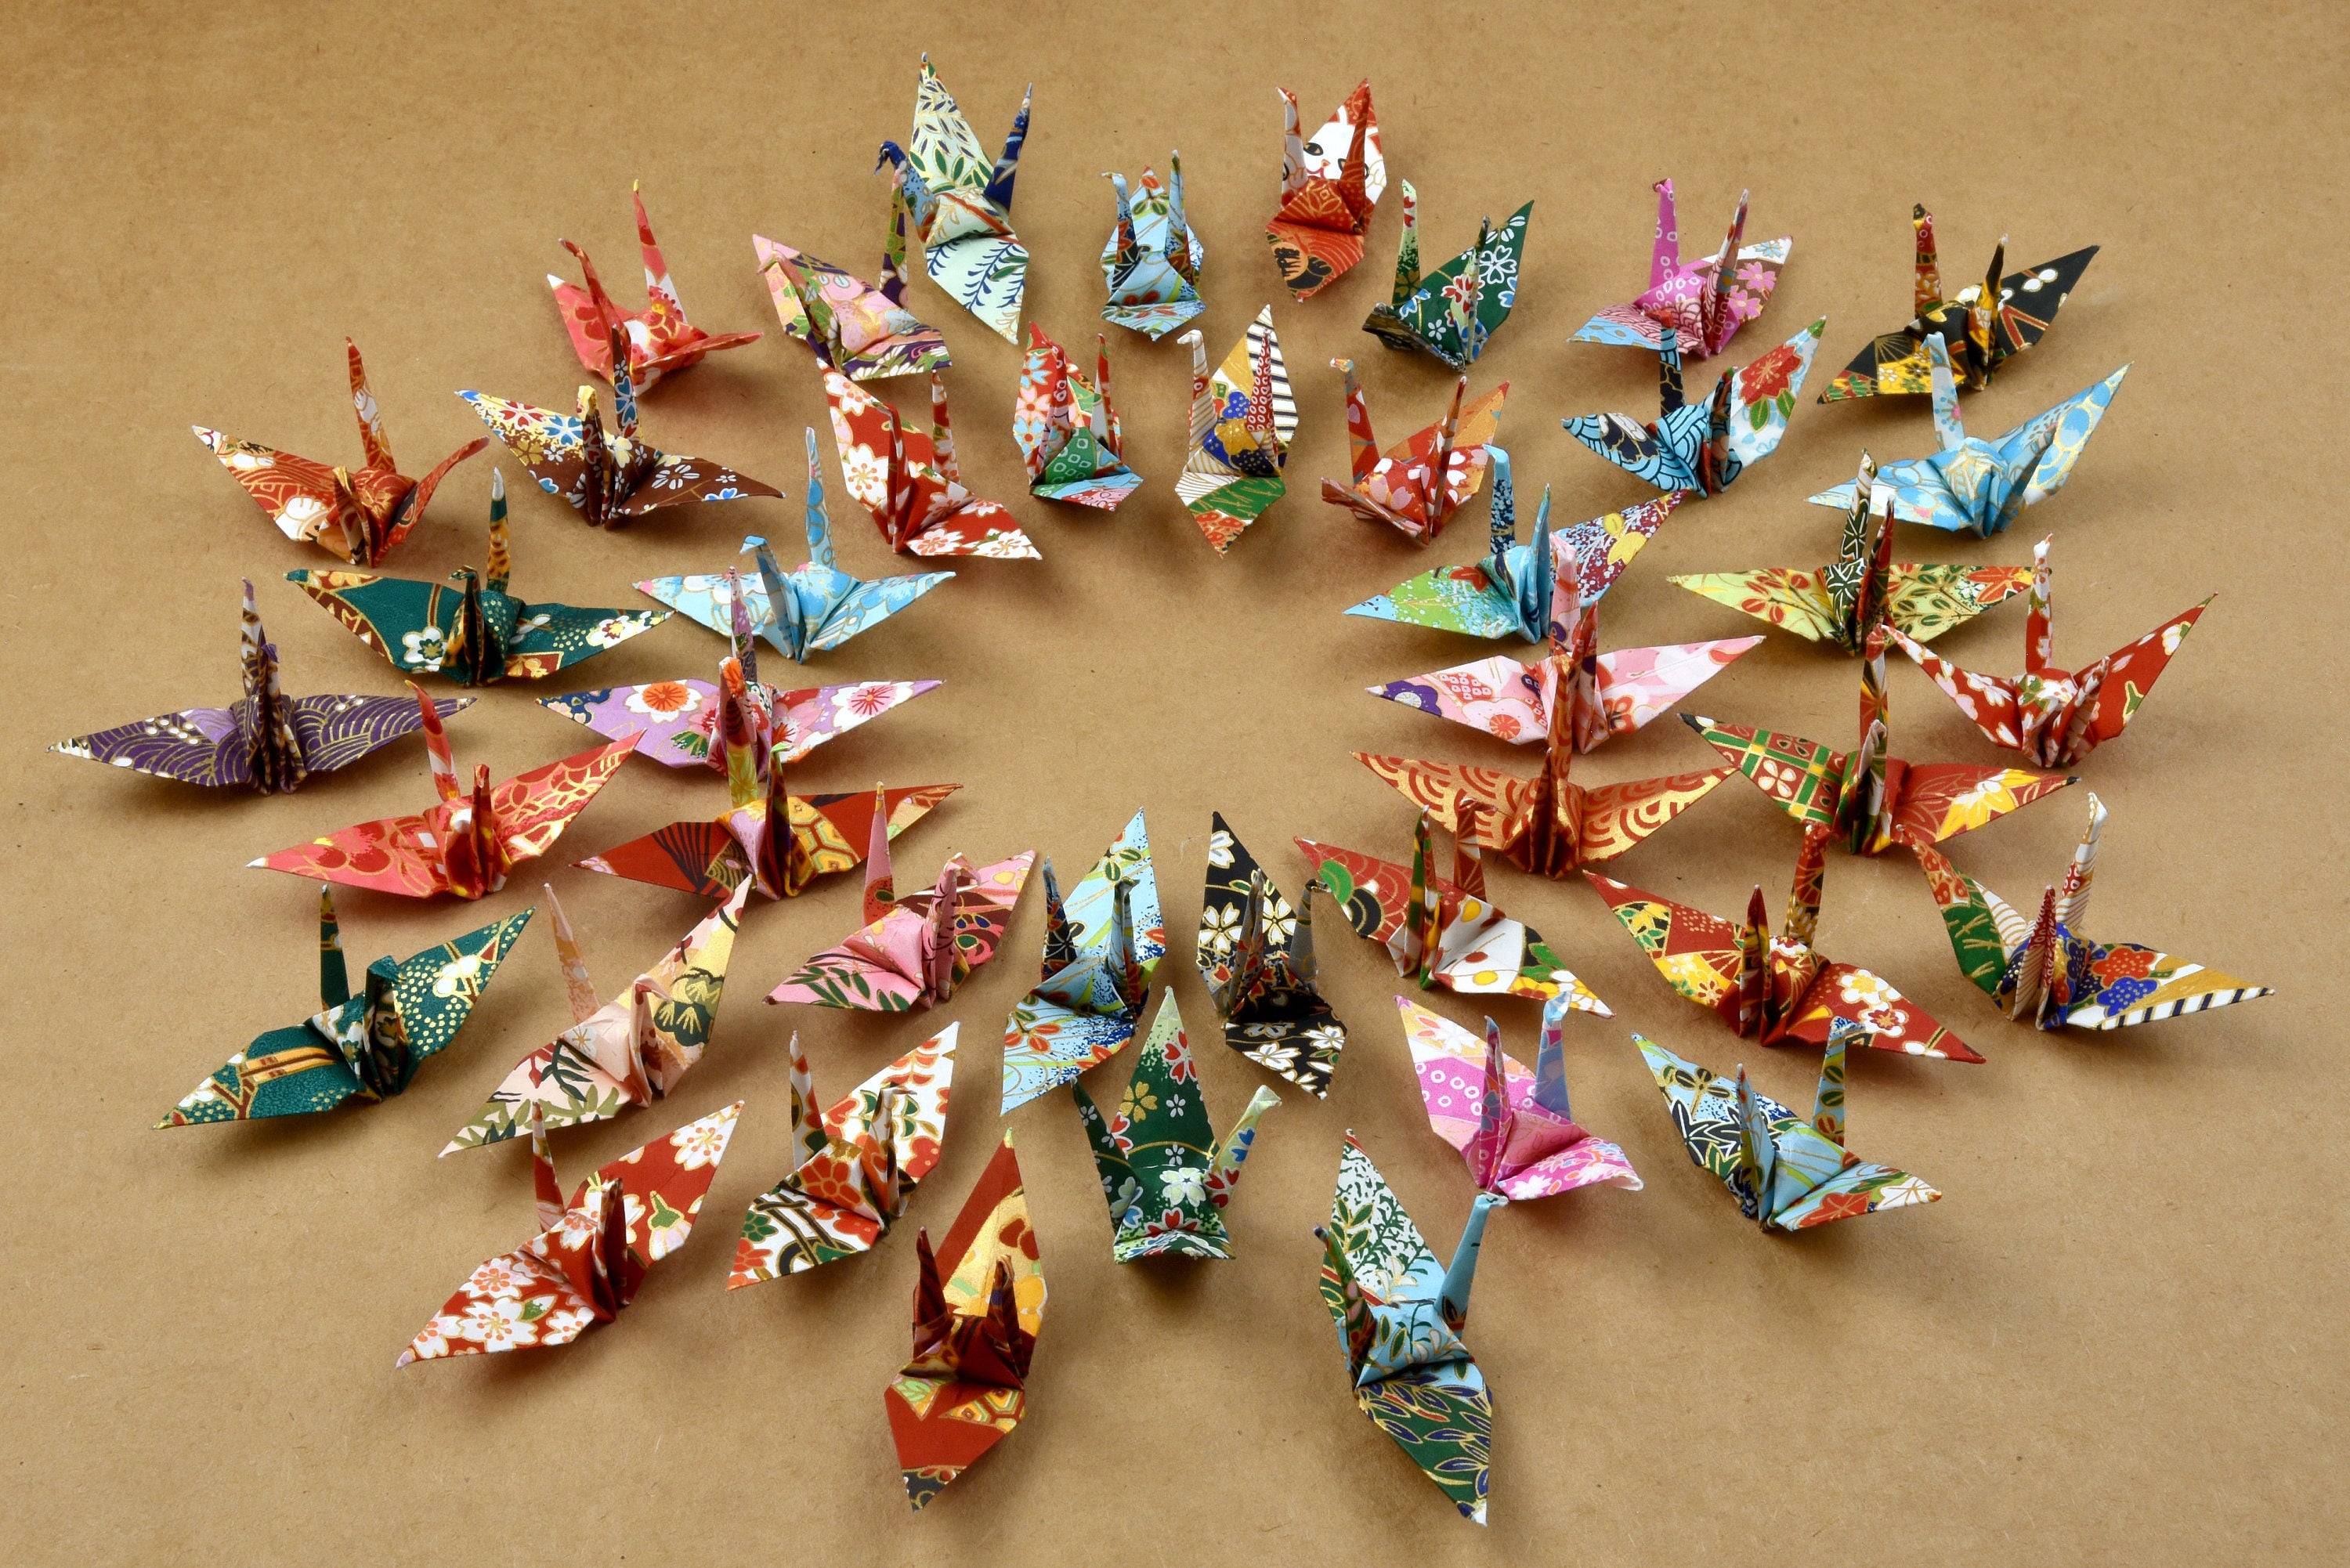 1000 Origami paper crane Washi Paper Mixed patterns Origami crane Made of 3x3 inch Japanese Print Chiyogami Paper Art Ornament  Decoration